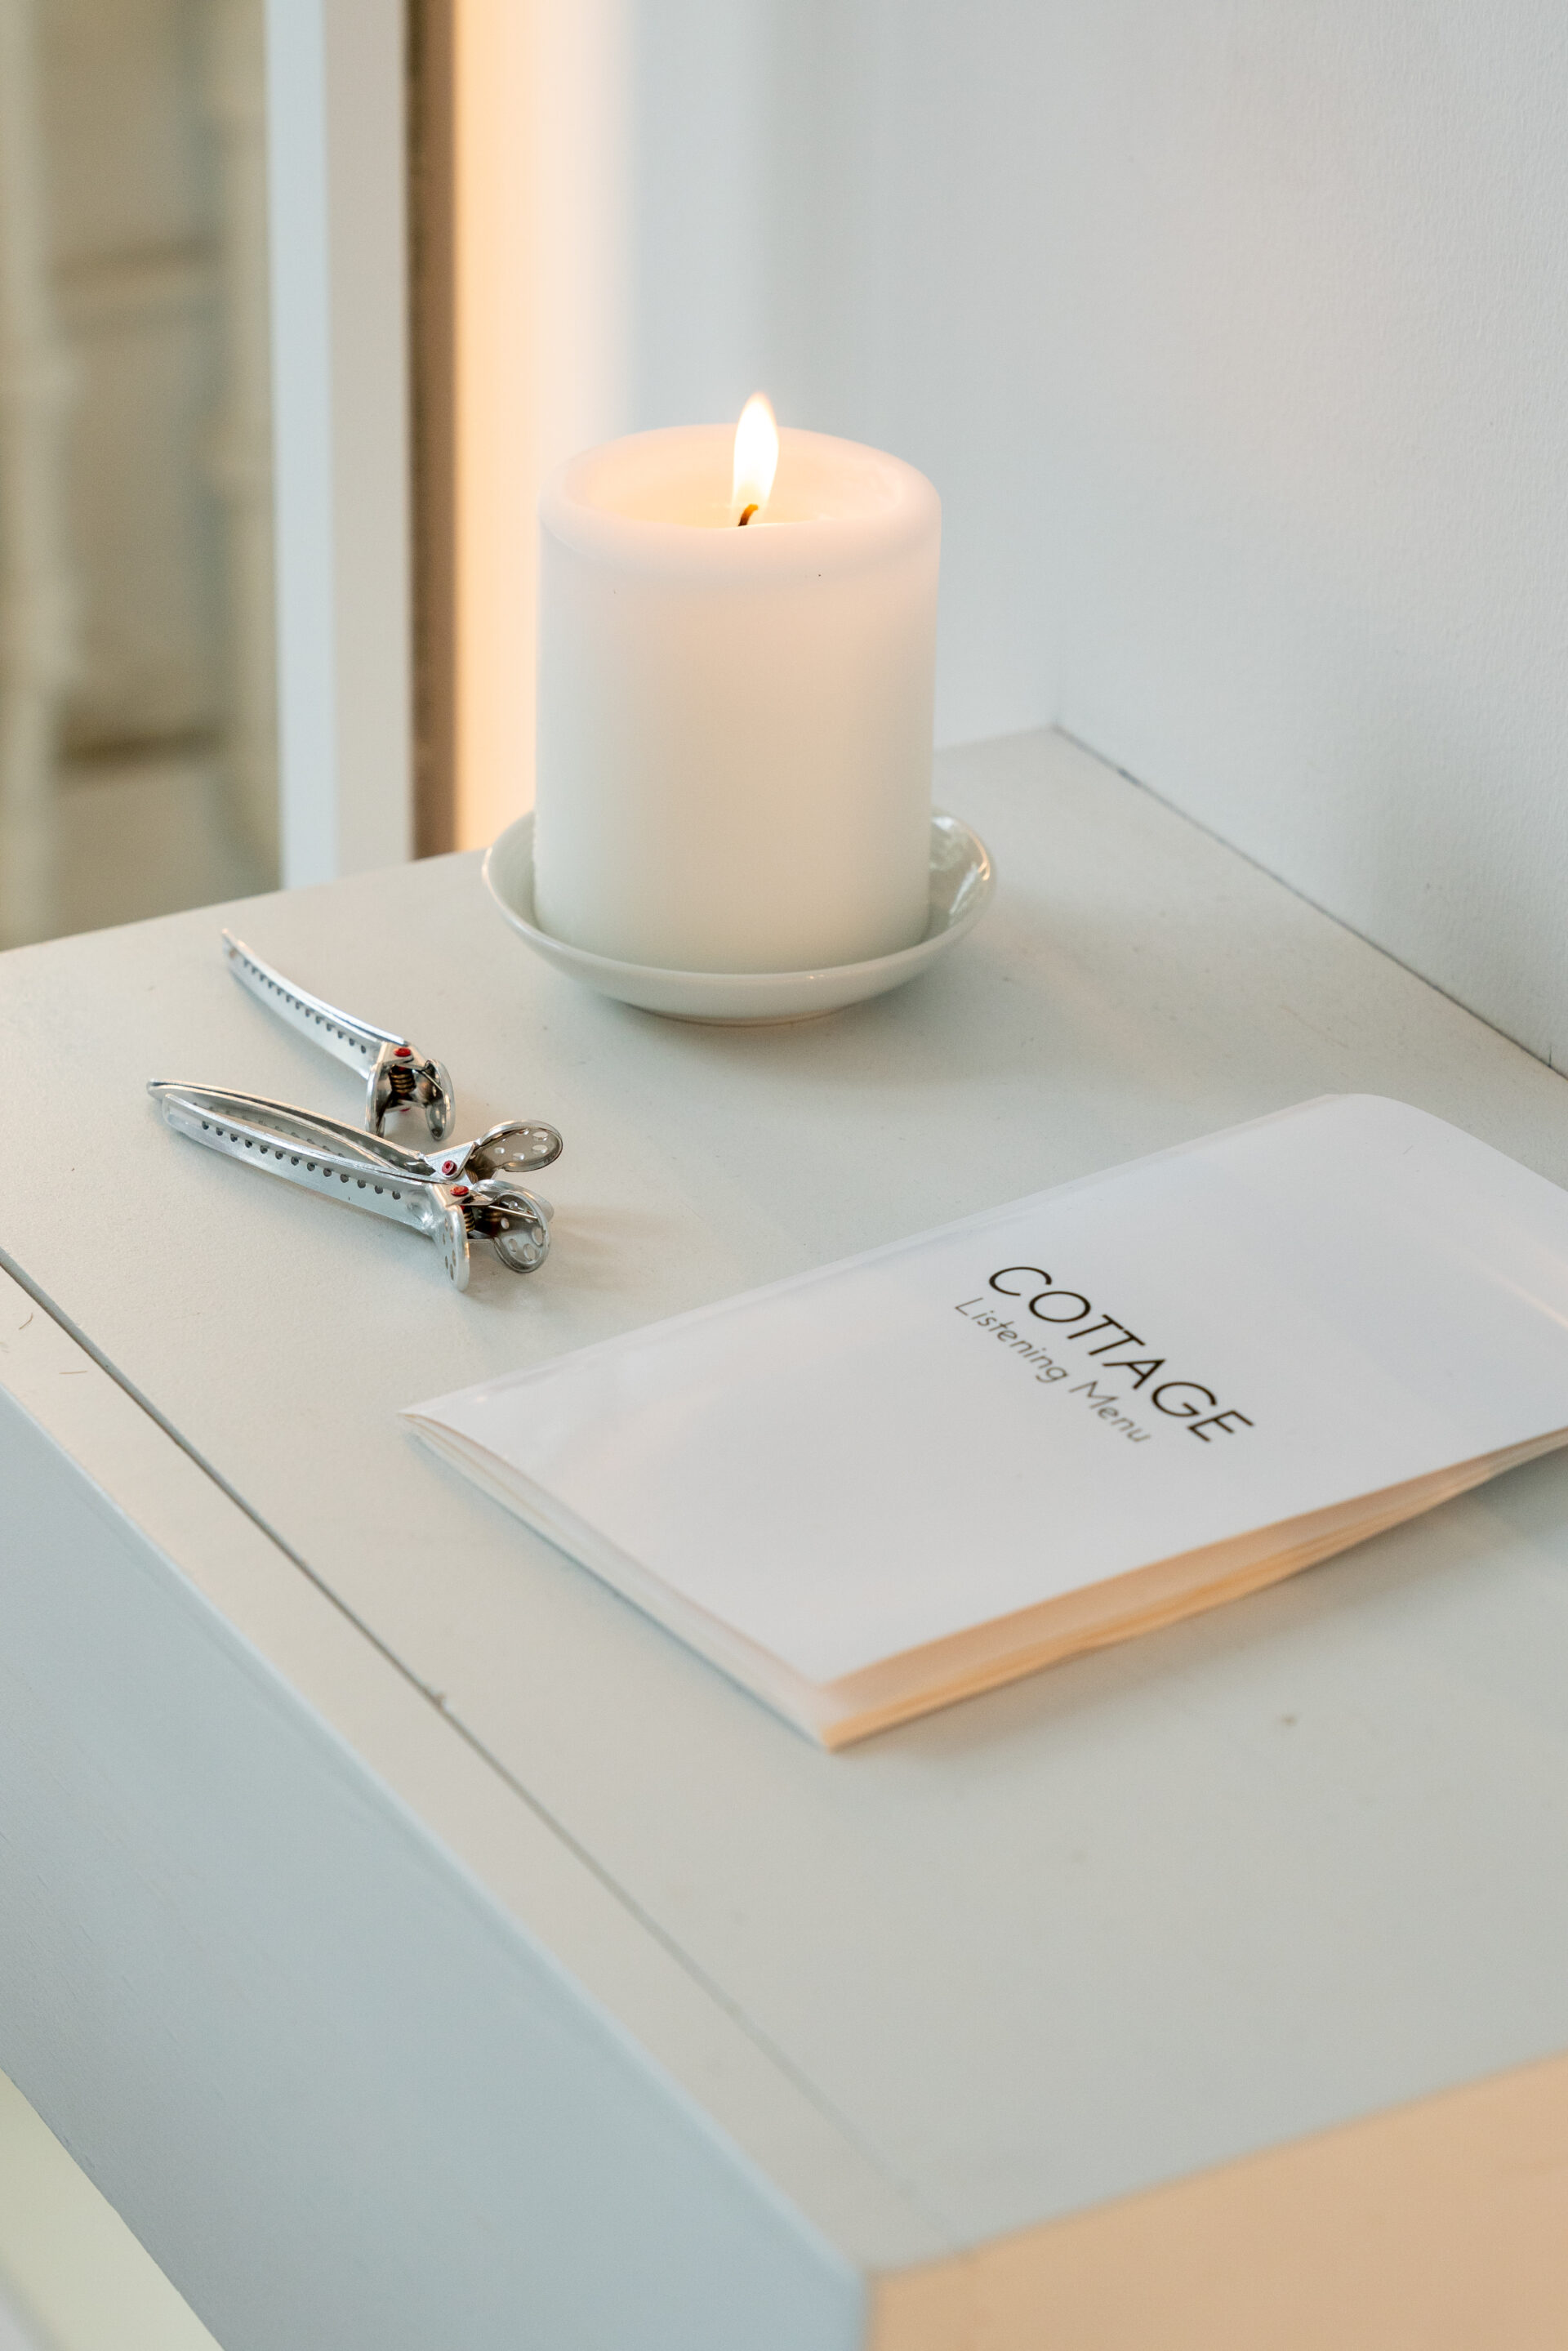 There is a table with a candle, hair tools, and a booklet for "Cottage," a hair salon.